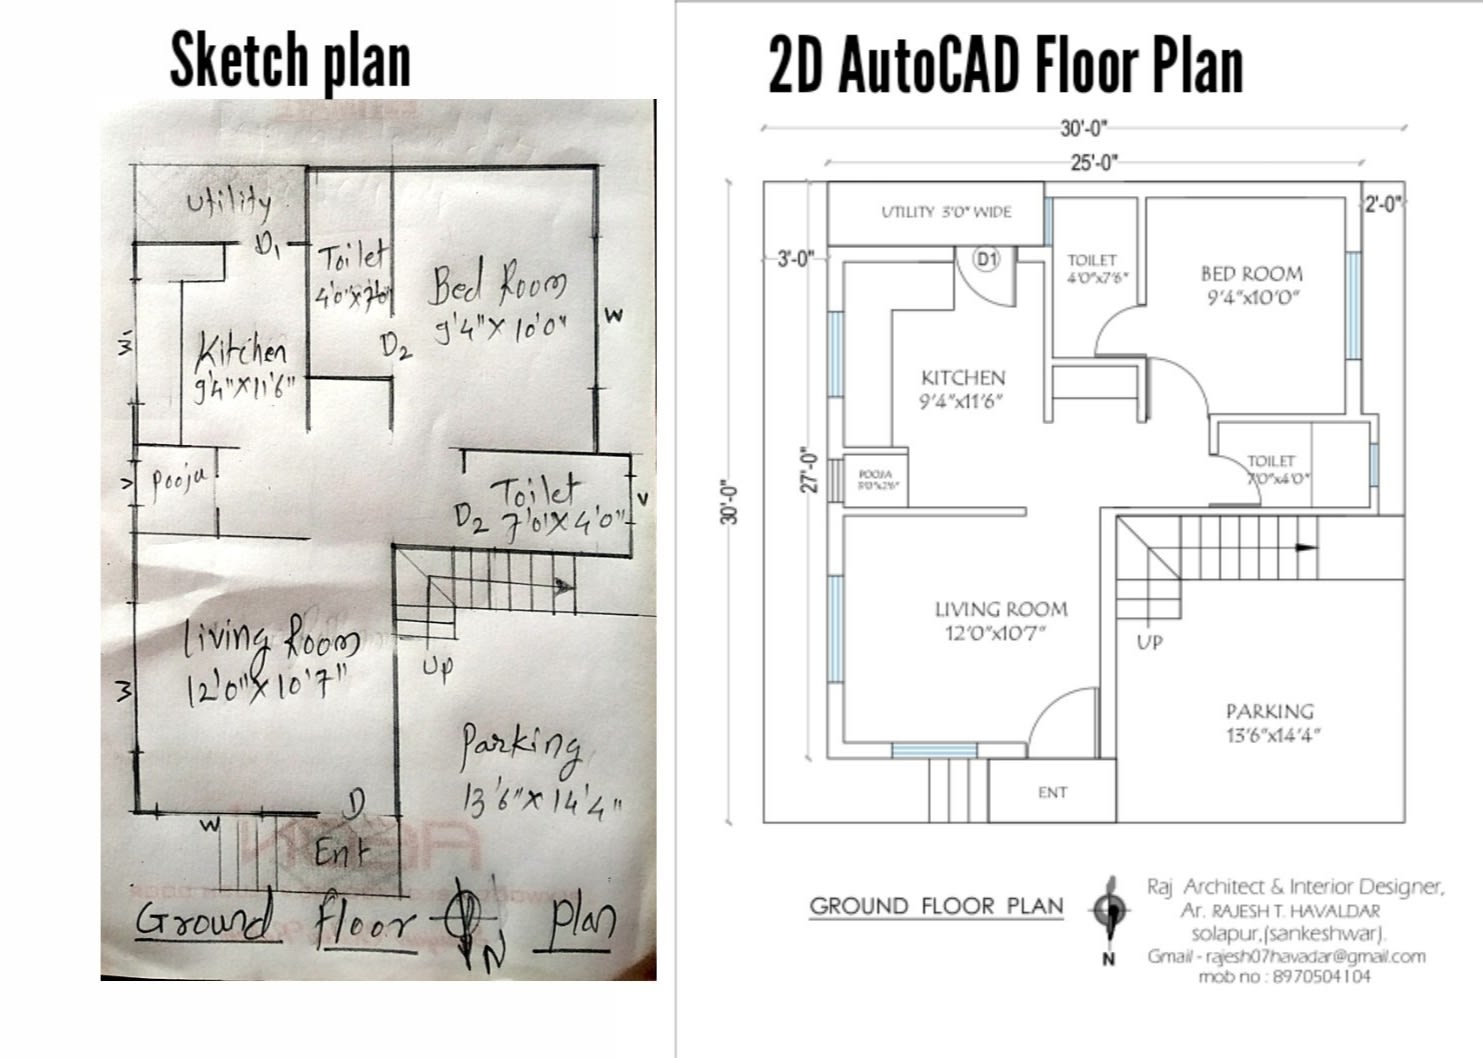 Draw Floor Plans With the RoomSketcher App - RoomSketcher